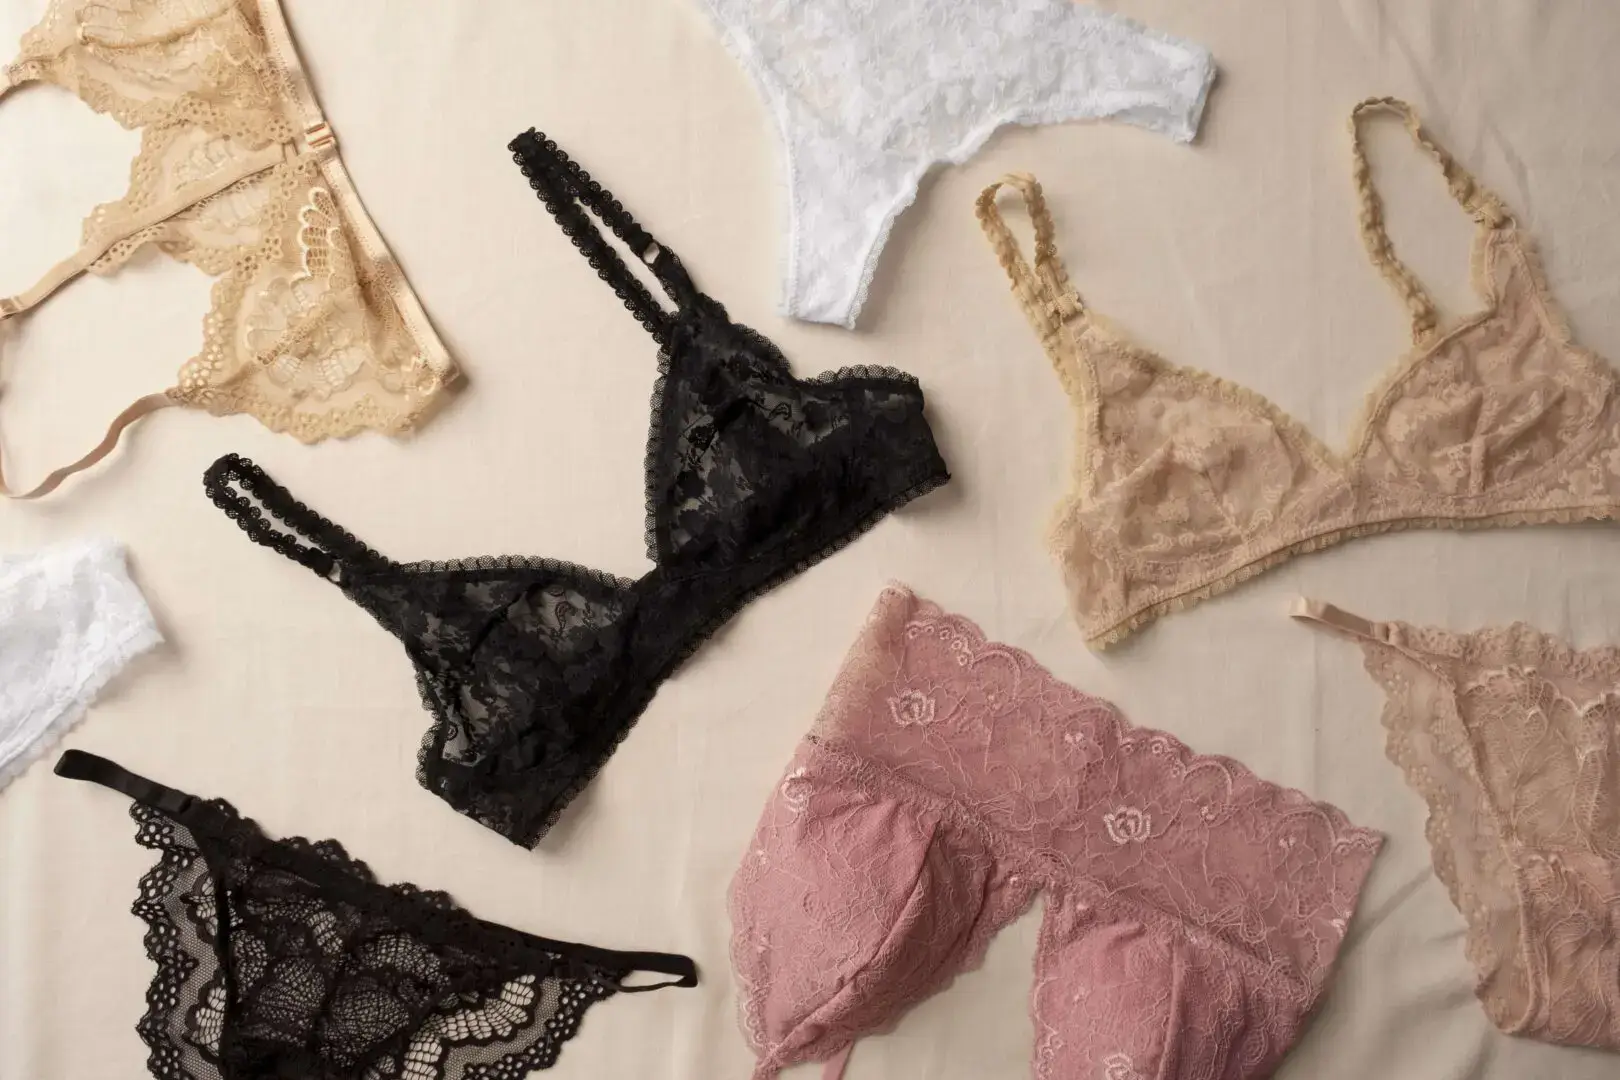 Groversons share a beginners' guide to lingerie shopping - MediaBrief